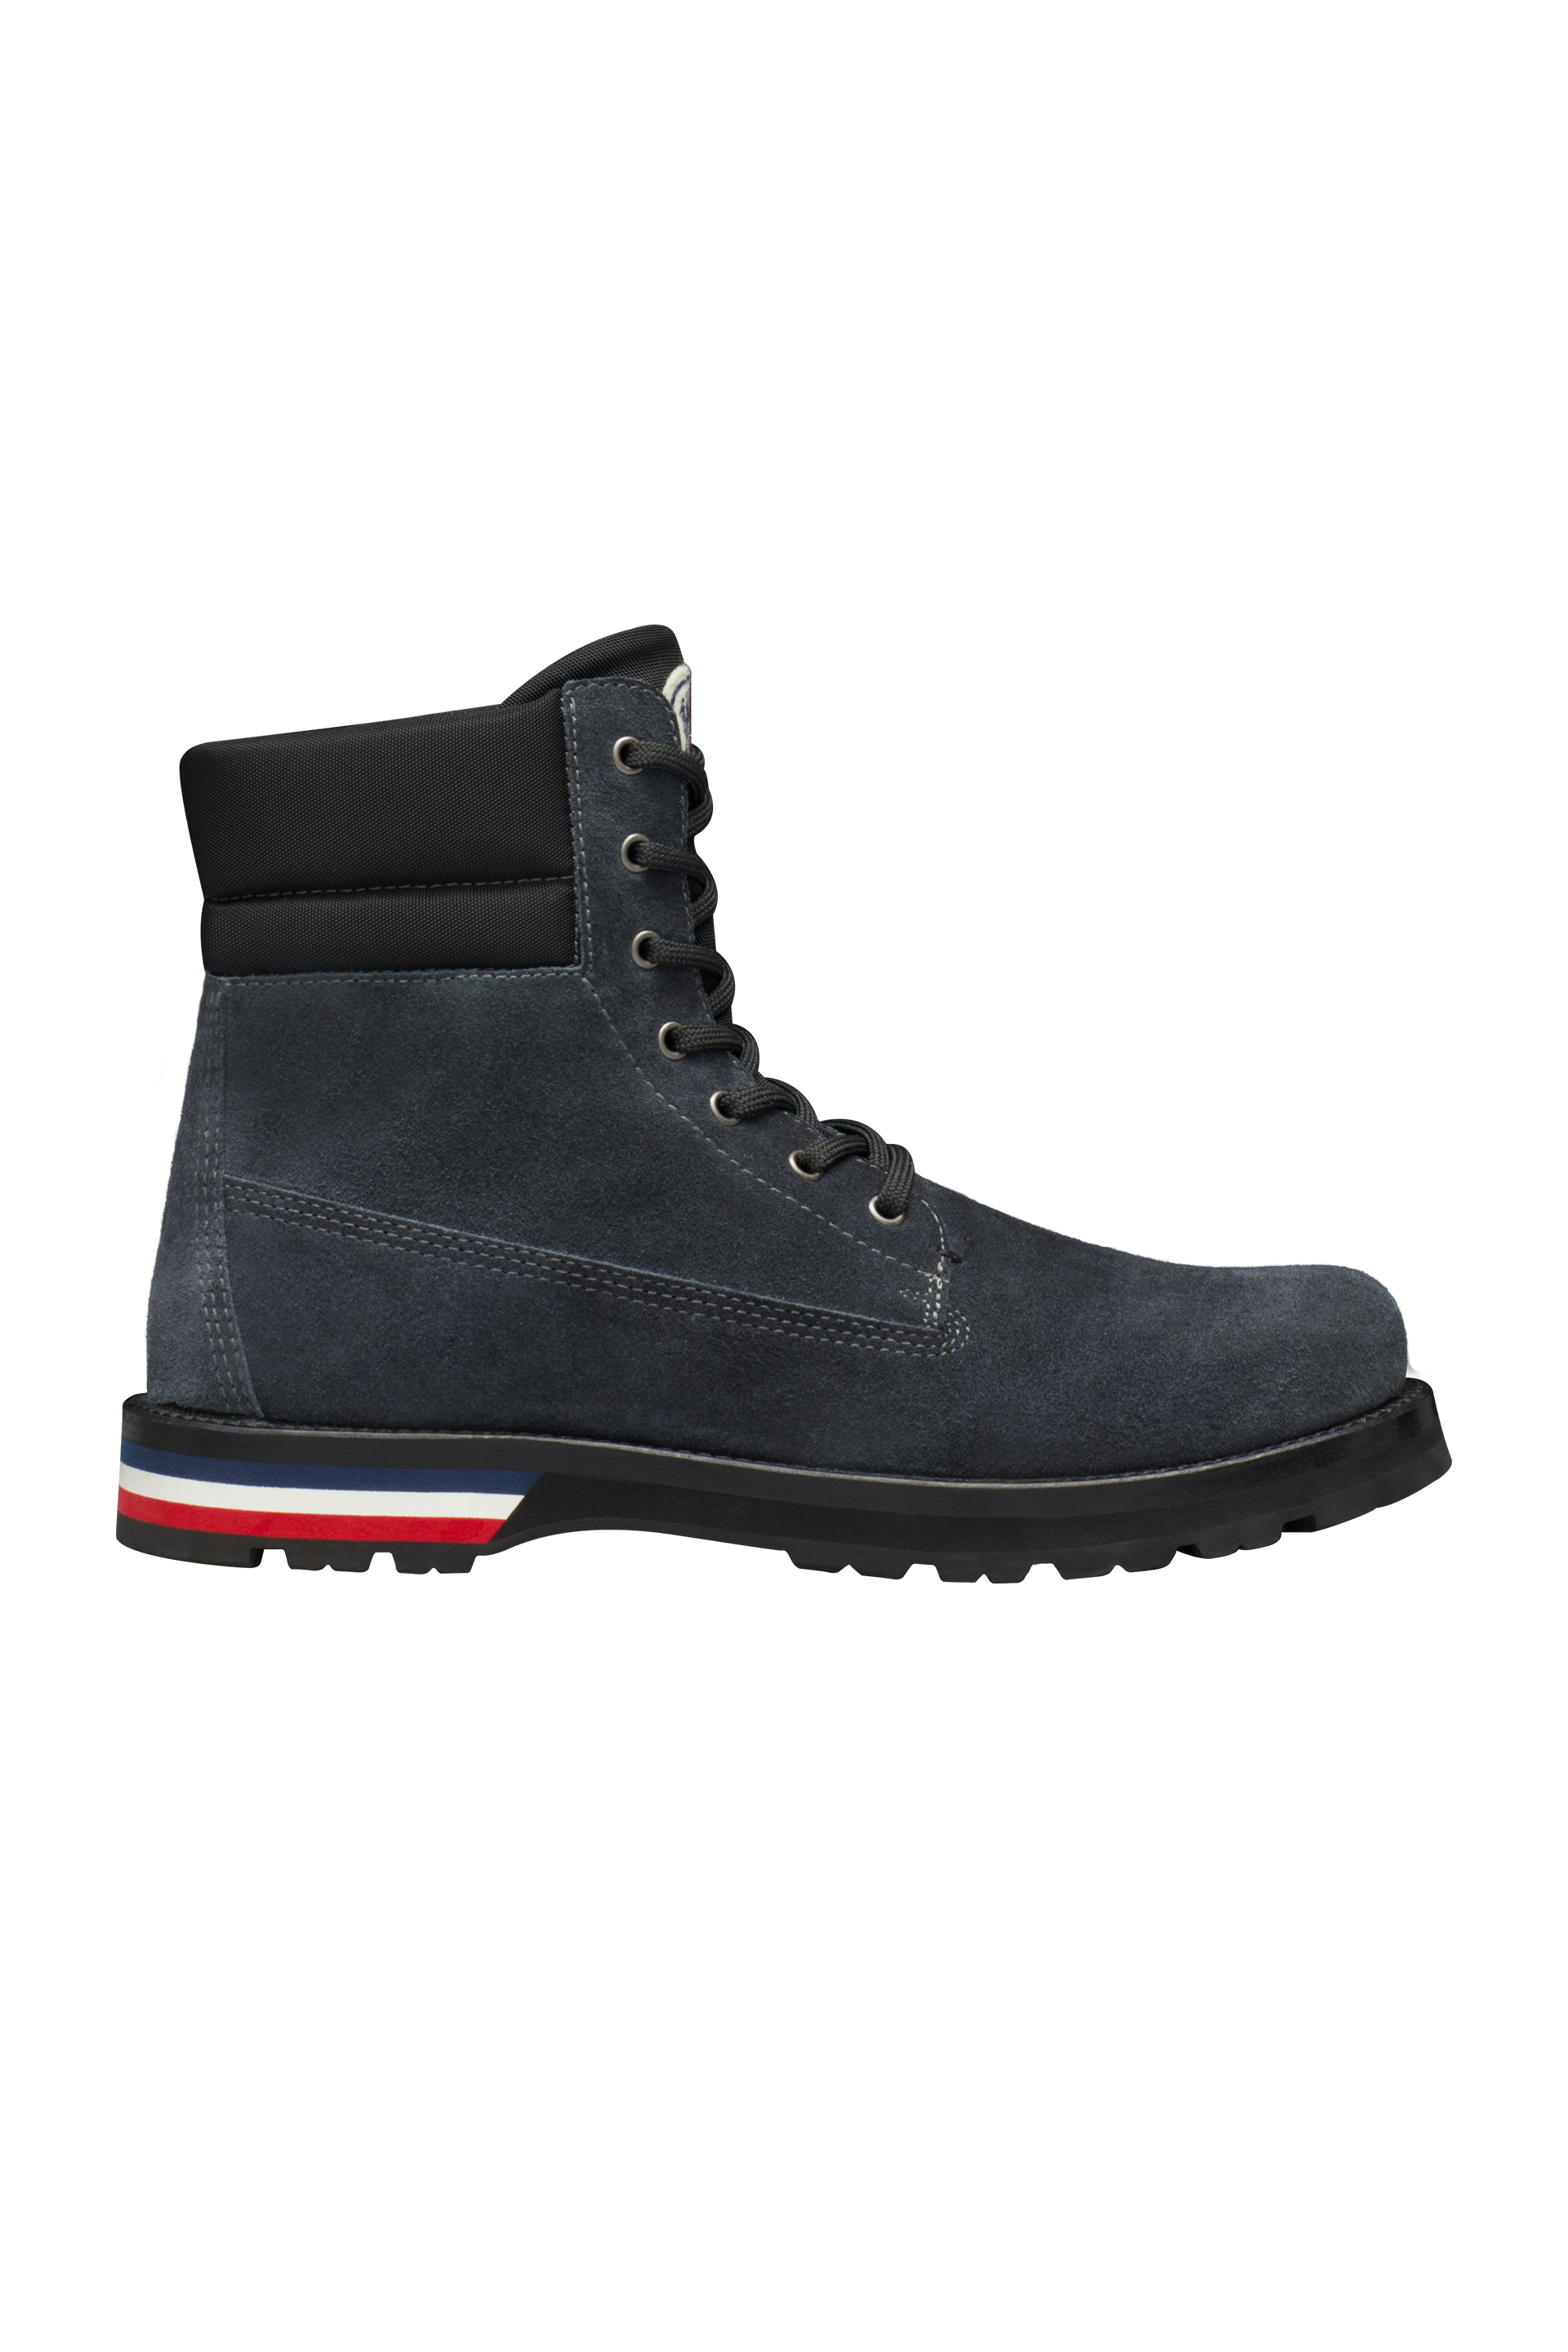 Moncler Collection Vancouver Lace-up Boots Grey Size 44